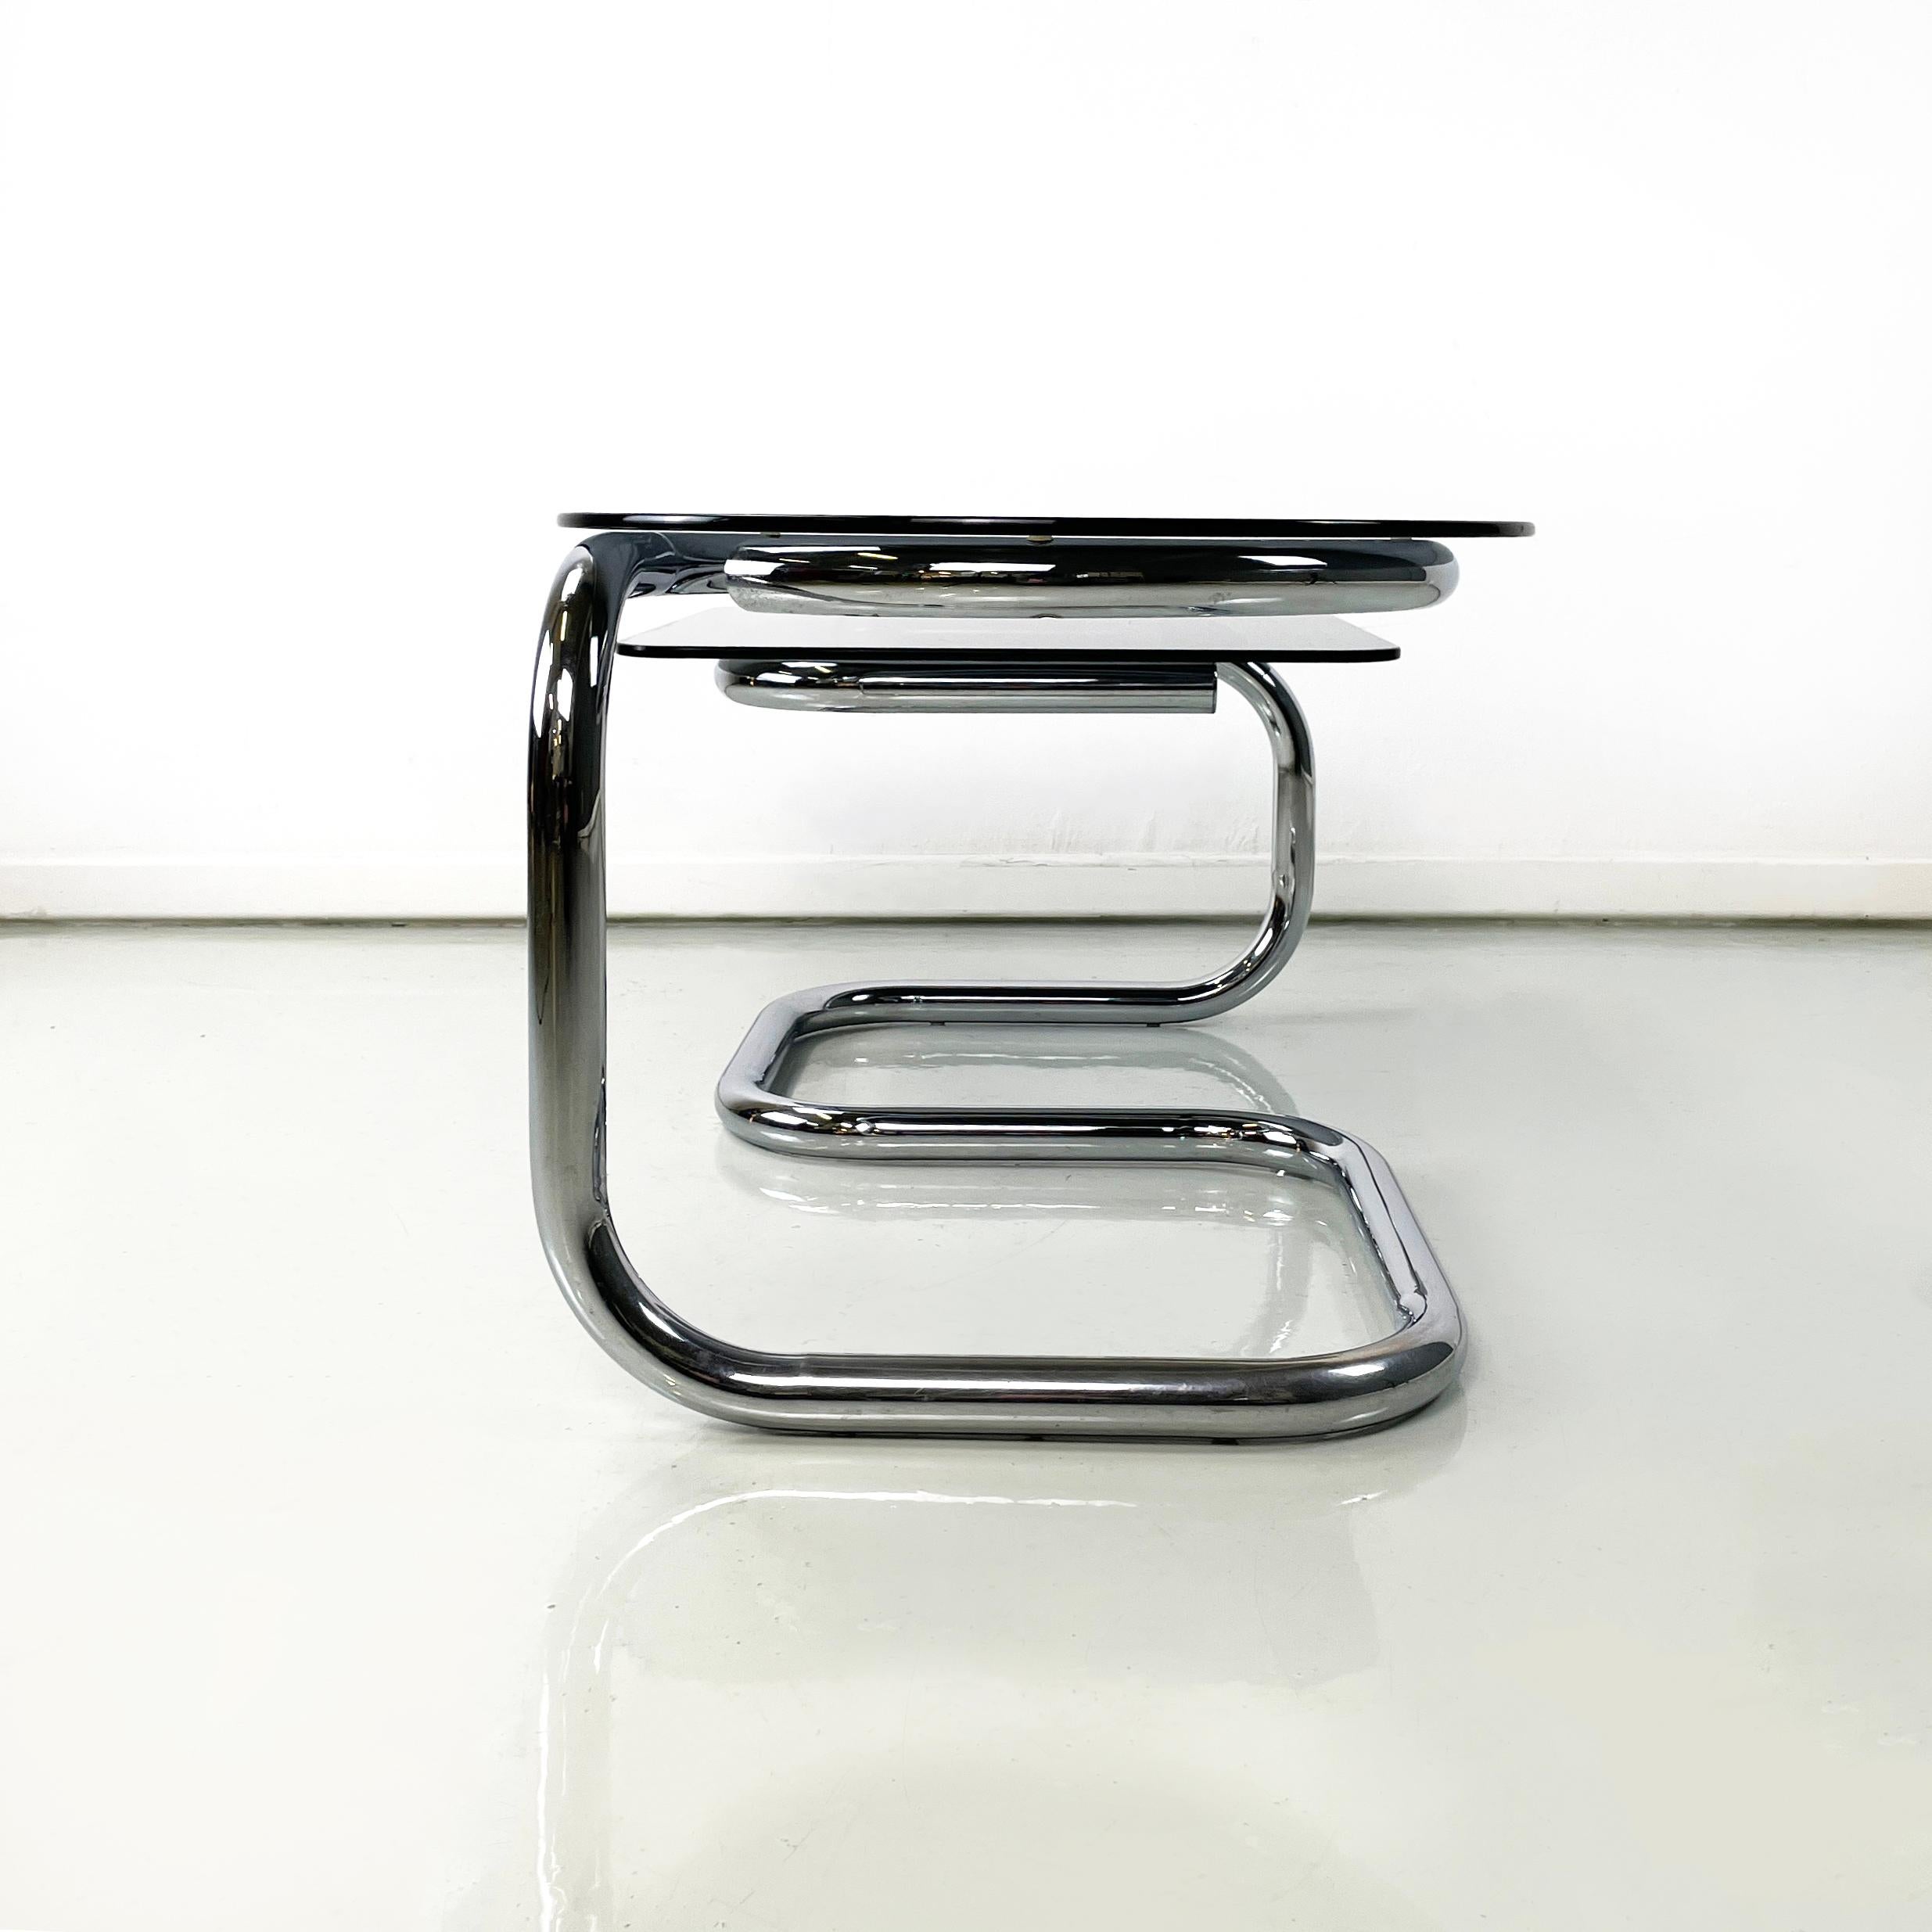 Late 20th Century Italian modern Square round coffee table in smoked glass chromed steel, 1970s For Sale